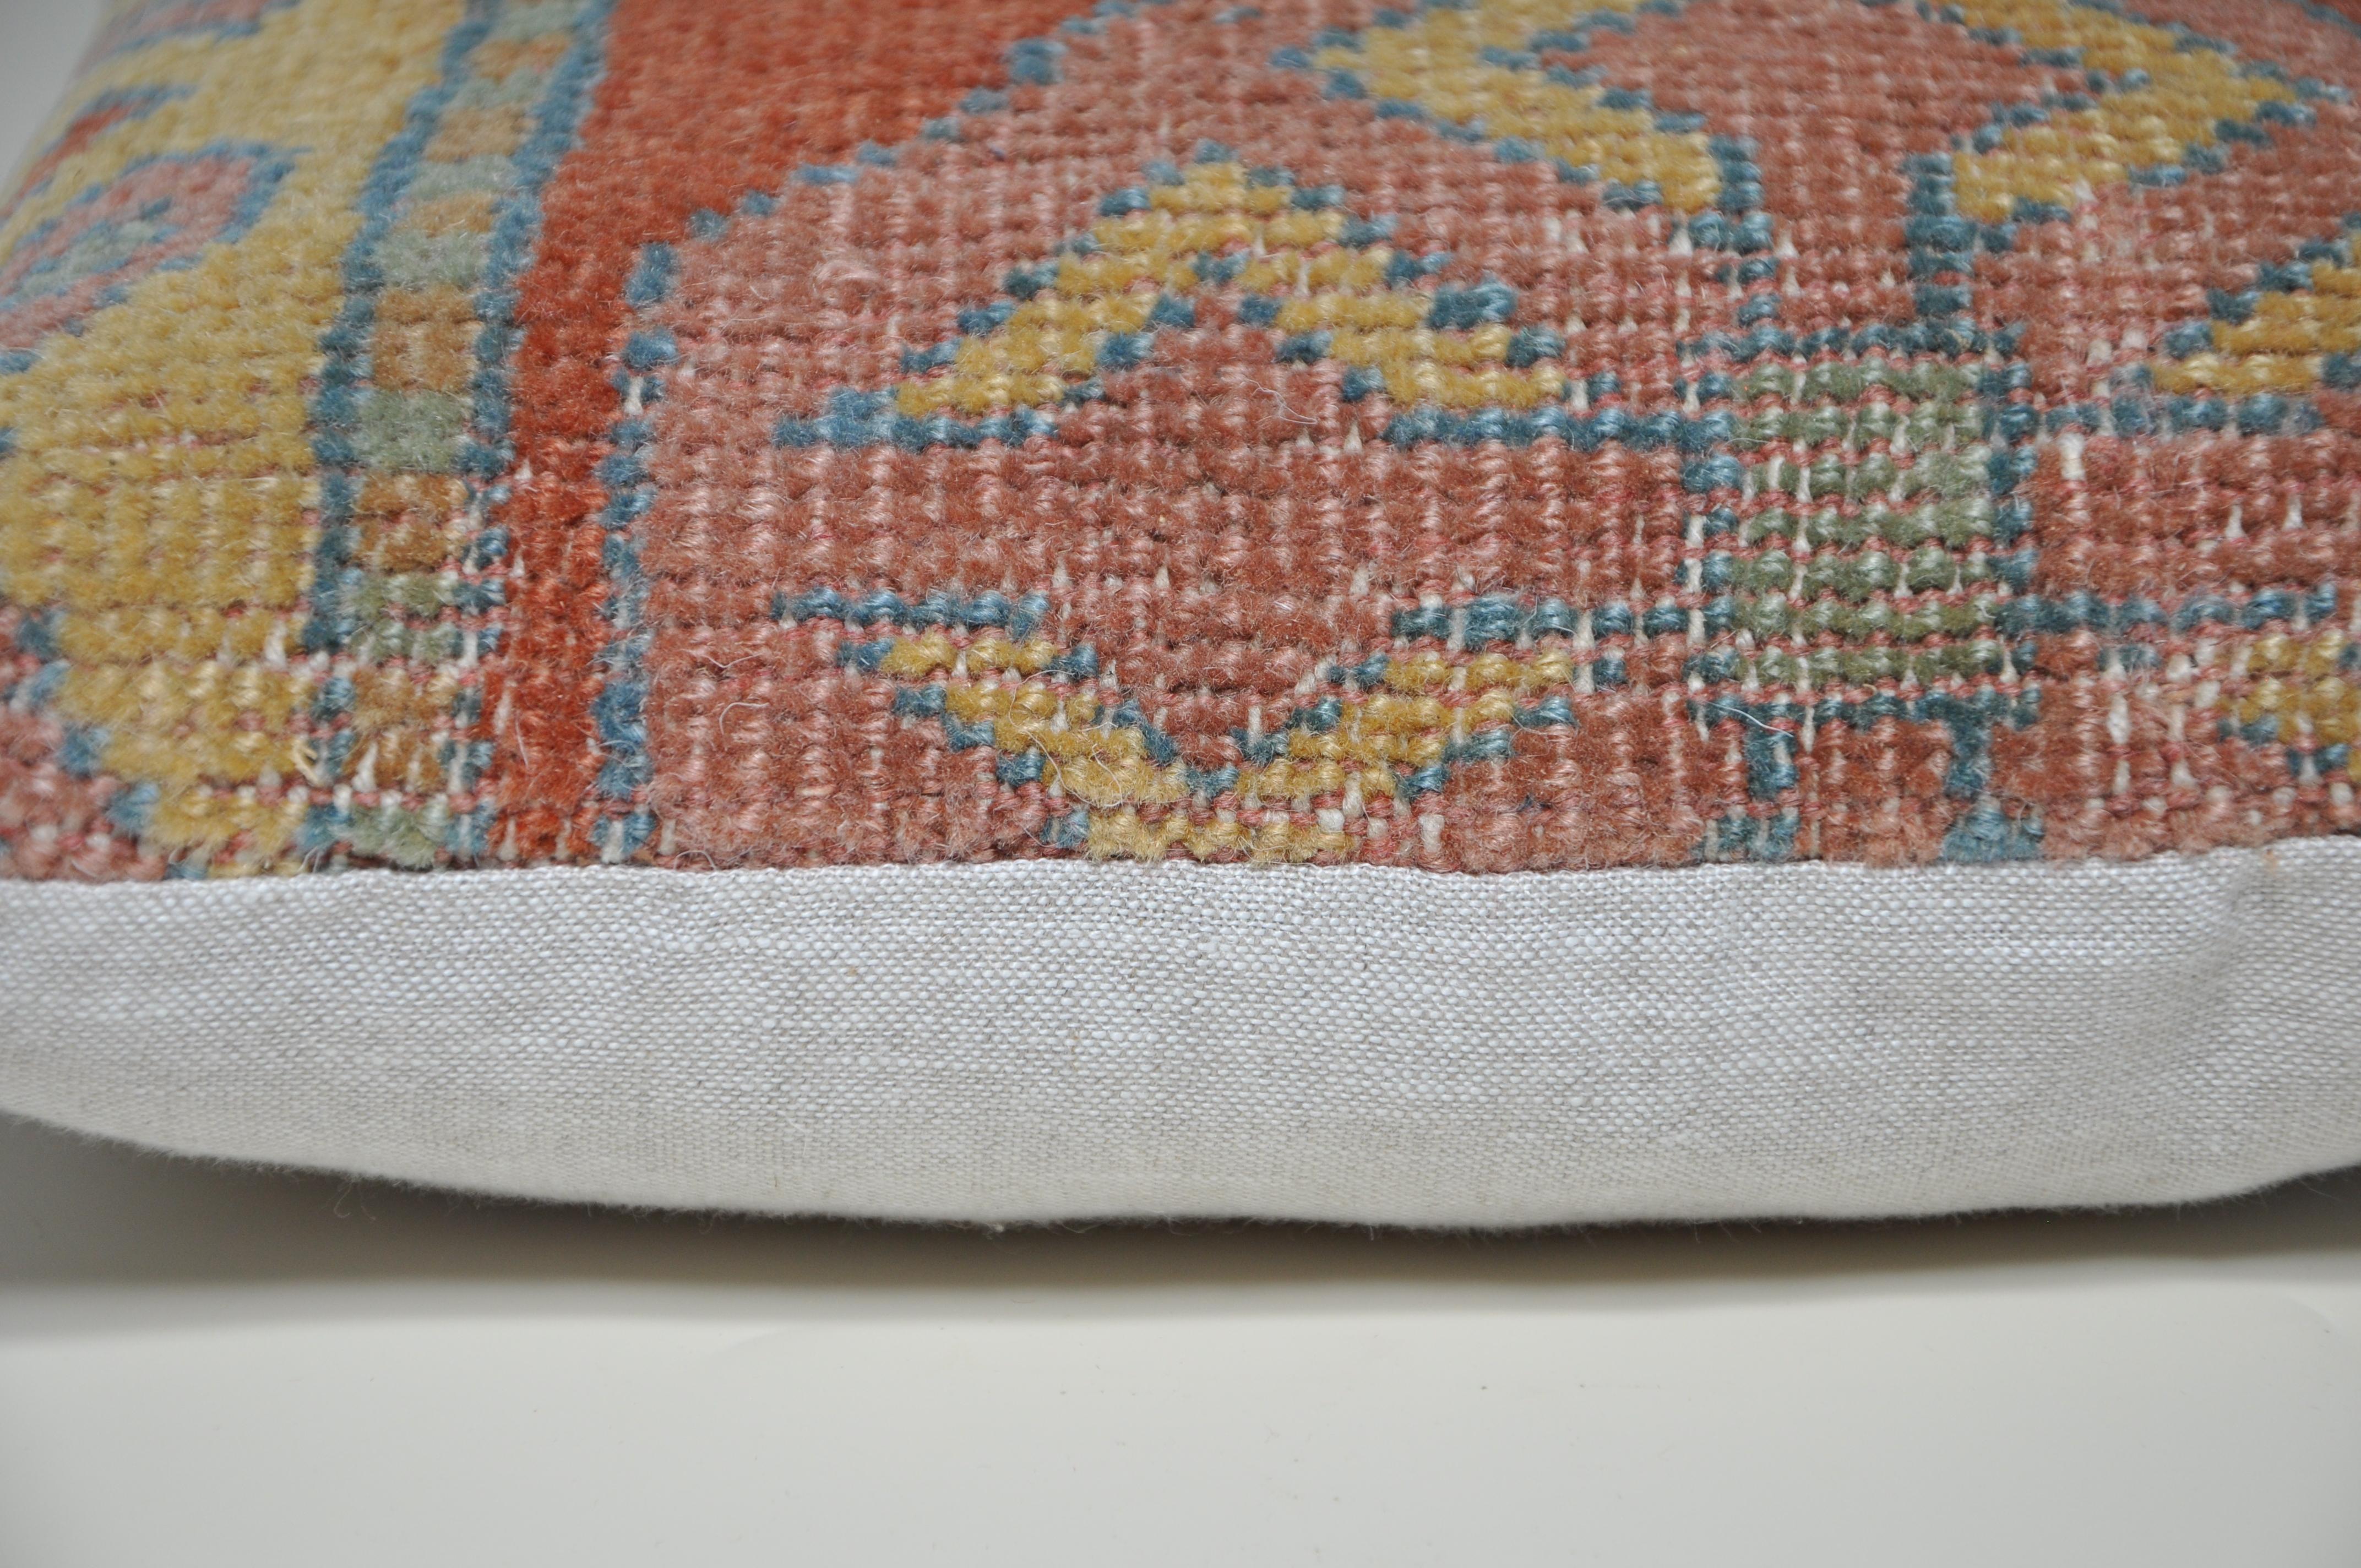 Luxury pillow created from an exquisite piece of vintage kilim rug combined with Irish Linen by Irish designer Katie Larmour. Unique and one-of-a-kind. 

Each cushion is constructed in Ireland.
Filled with a new, custom-made, plush duck feather